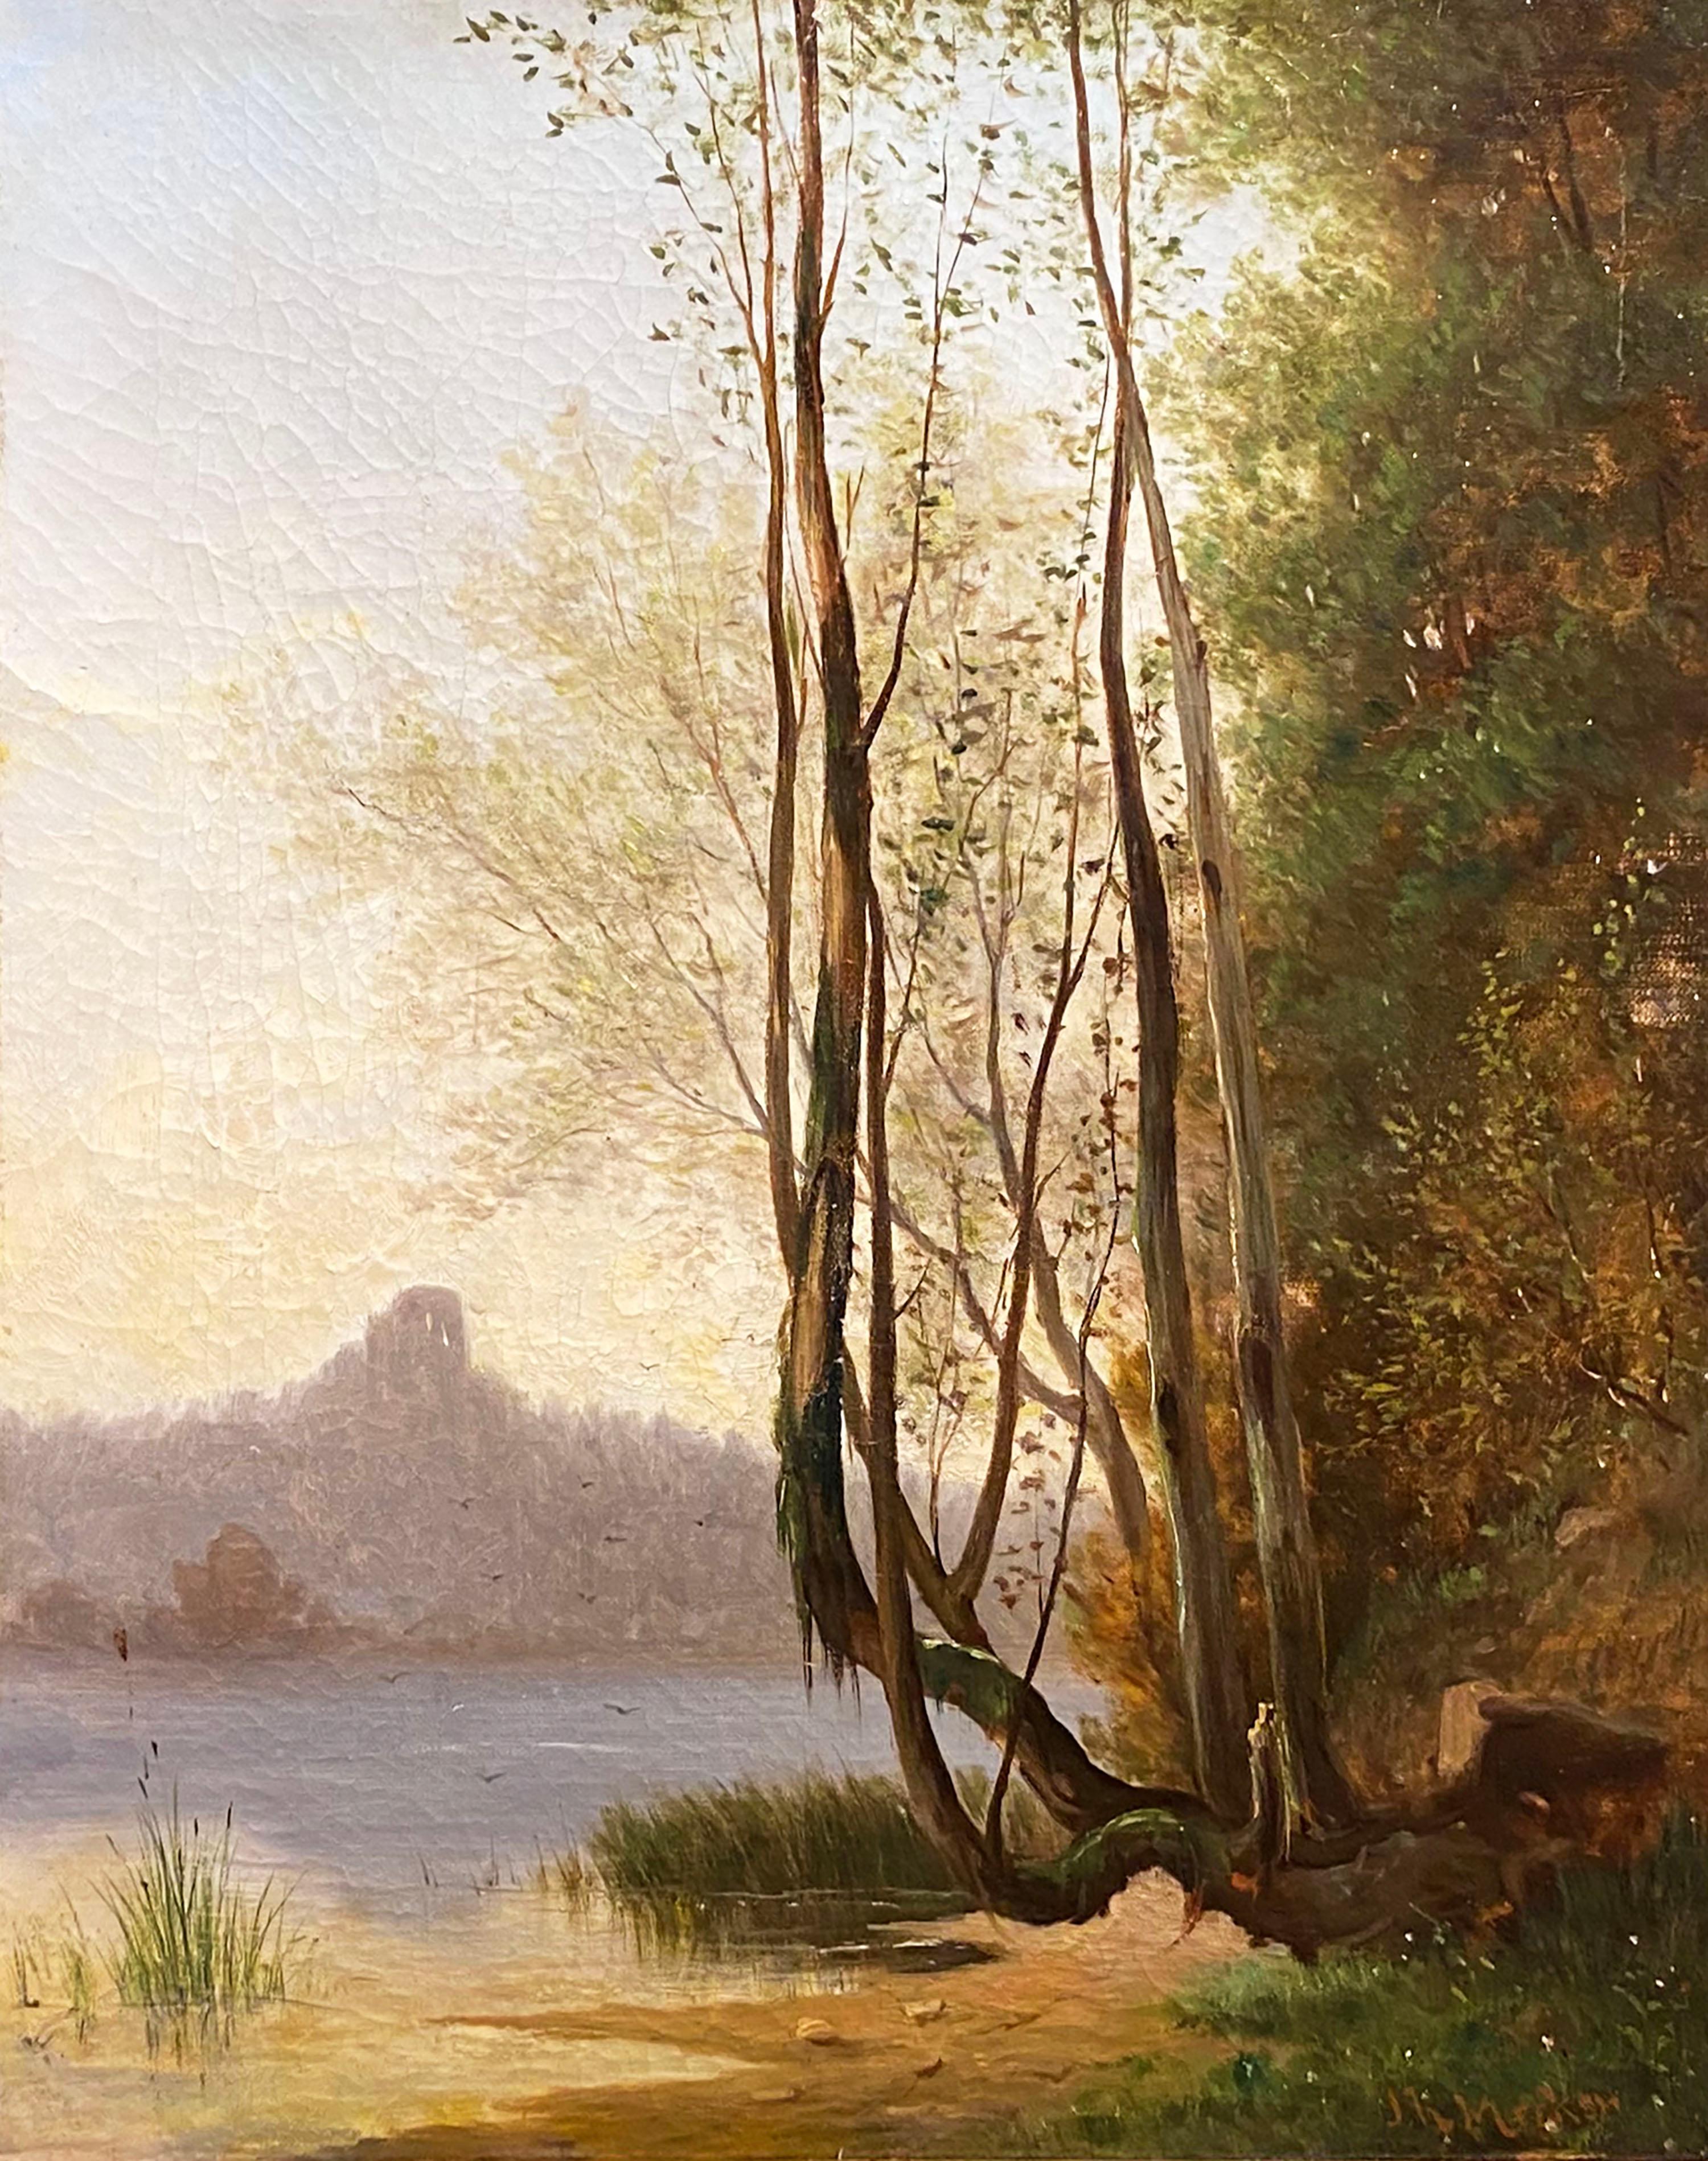 Edge of the River - Painting by Joseph Rusling Meeker